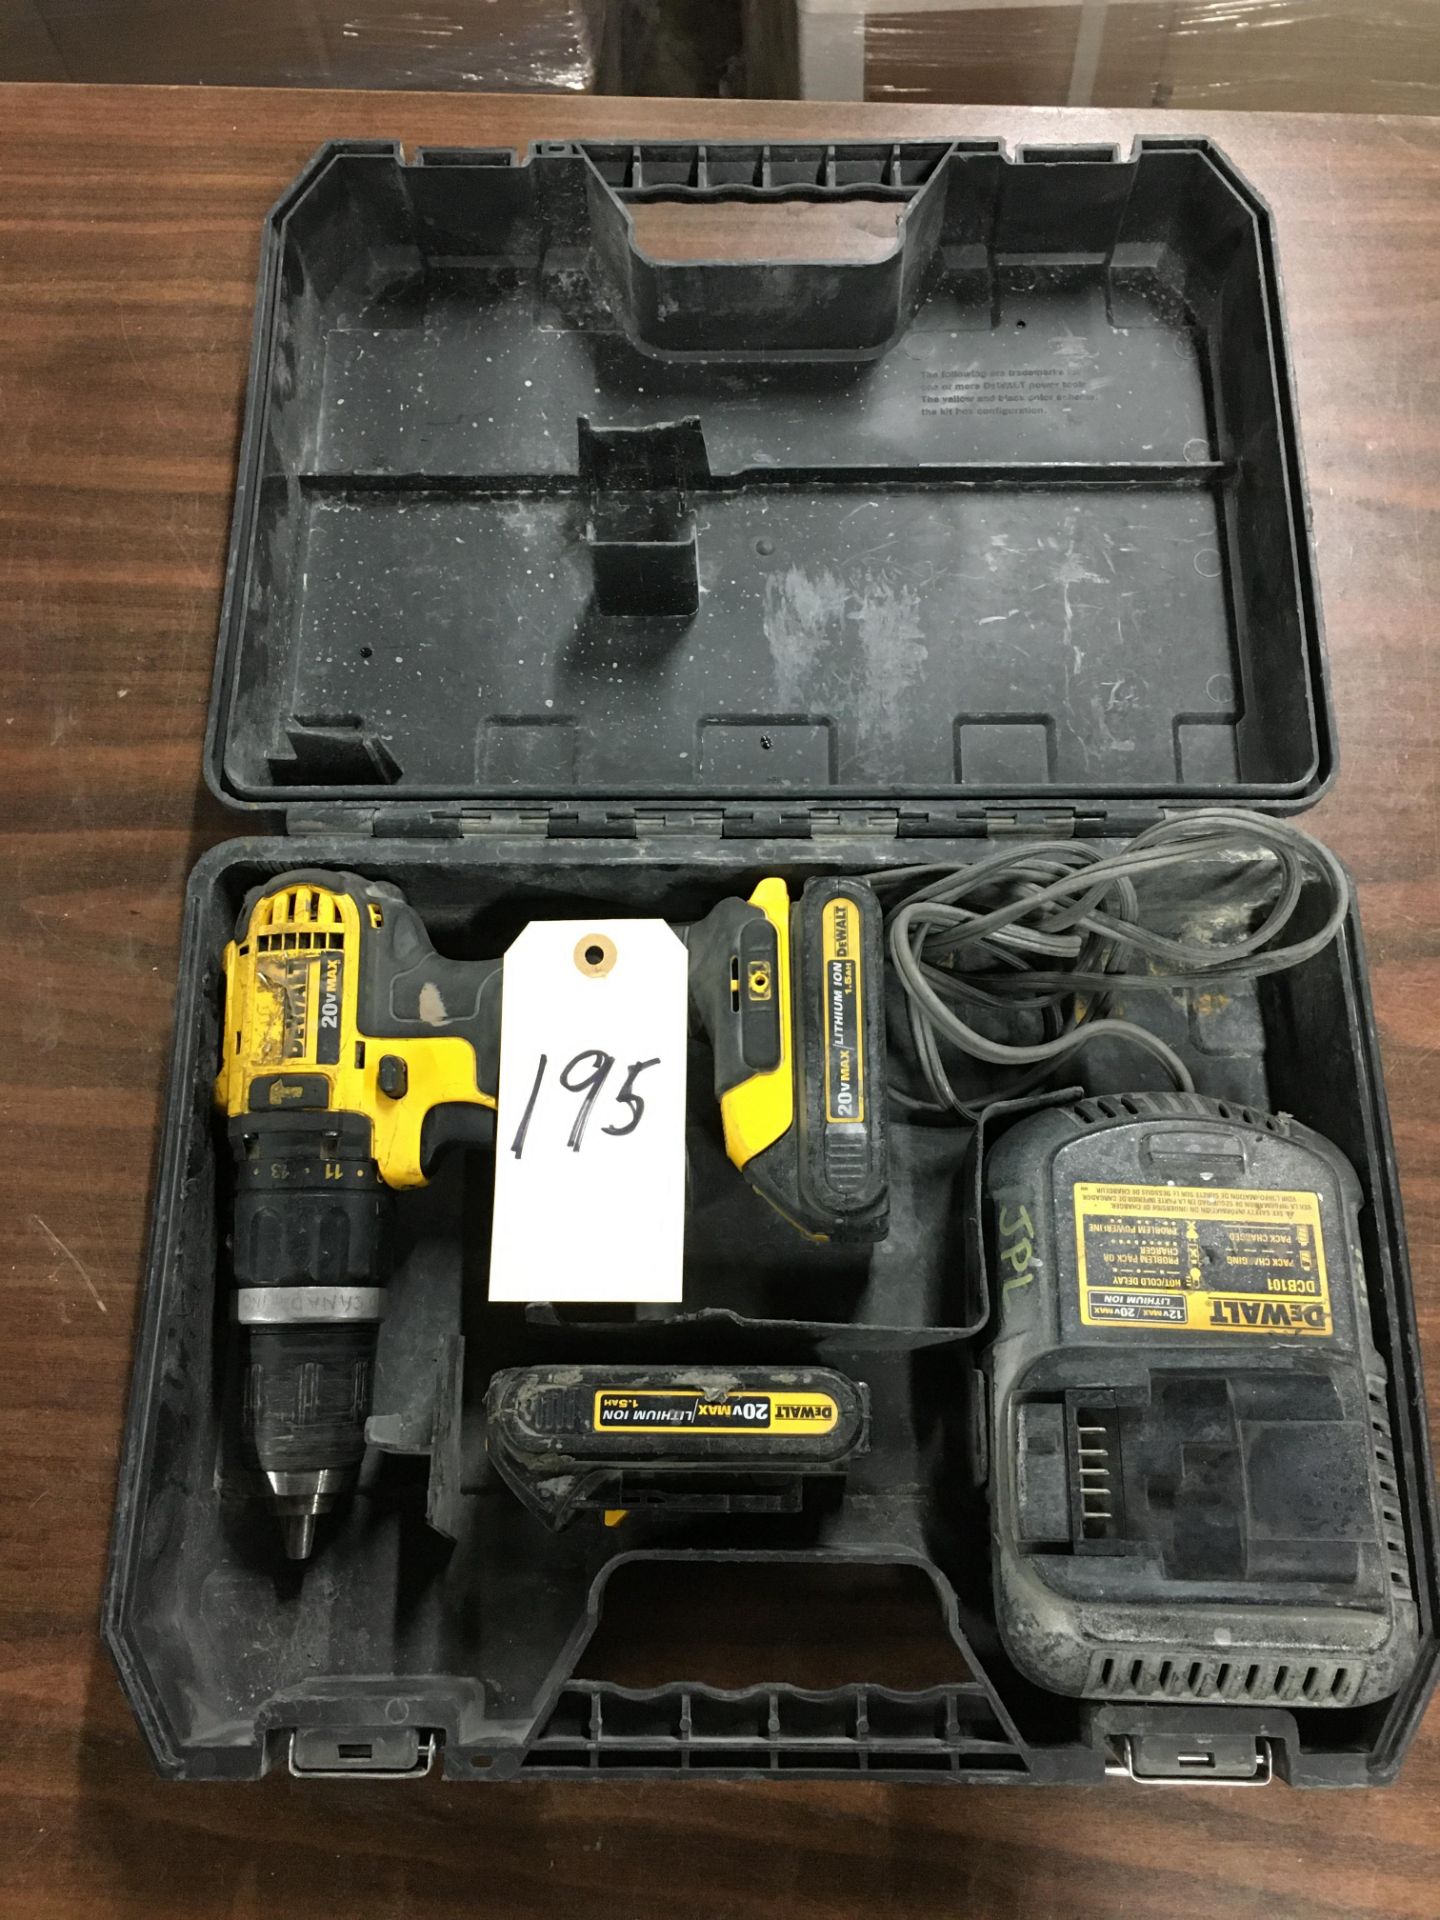 Dewalt DCD785 20V MAX Cordless Compact Hammer Drill/Driver Kit with (2) 1.5Ah Batteries, Charger and